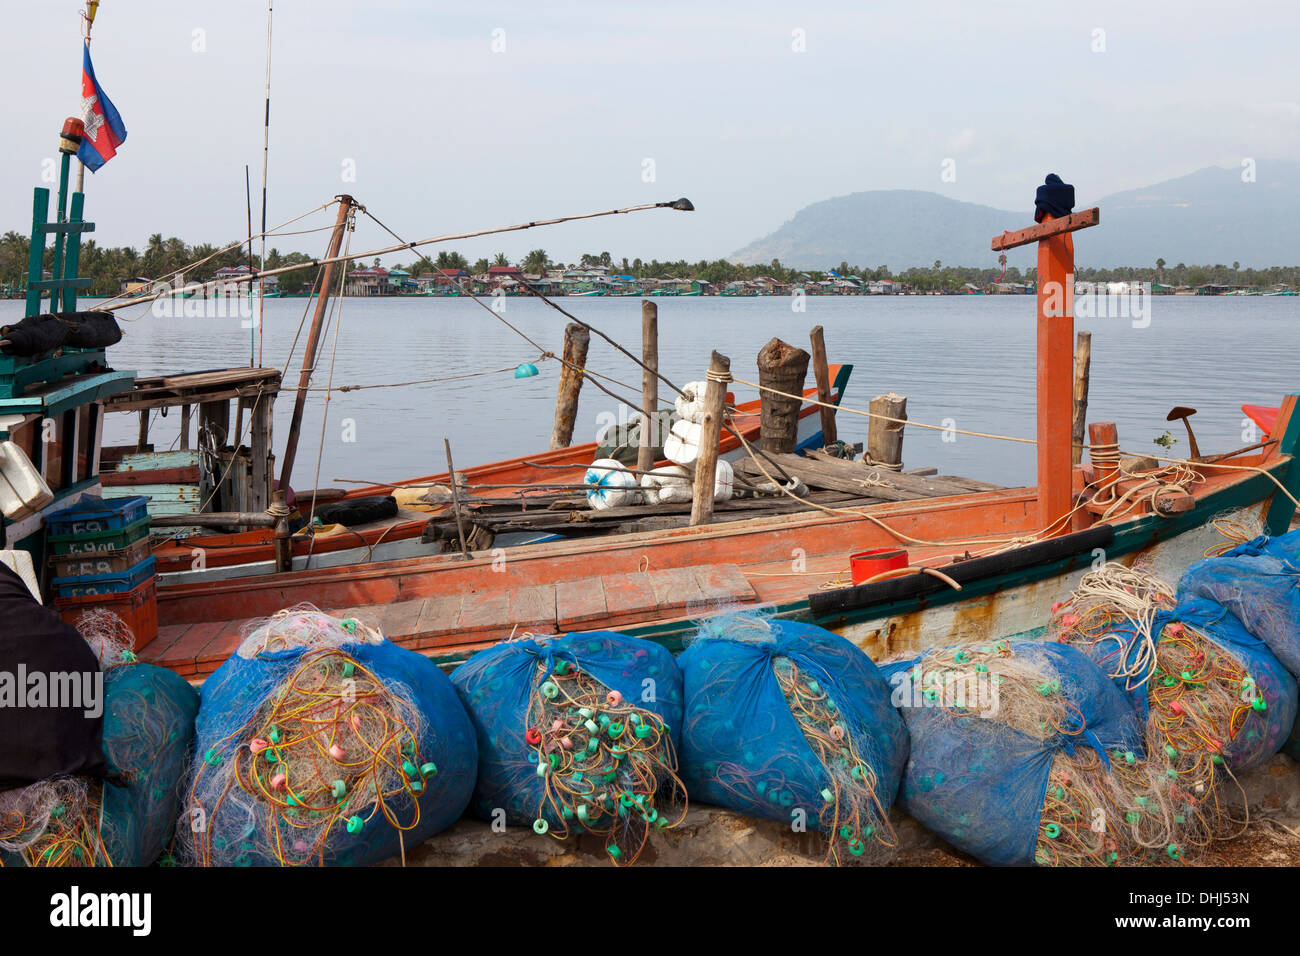 Fishing boats in Kampot at the Prek Thom River, Kampot province, Cambodia, Asia Stock Photo